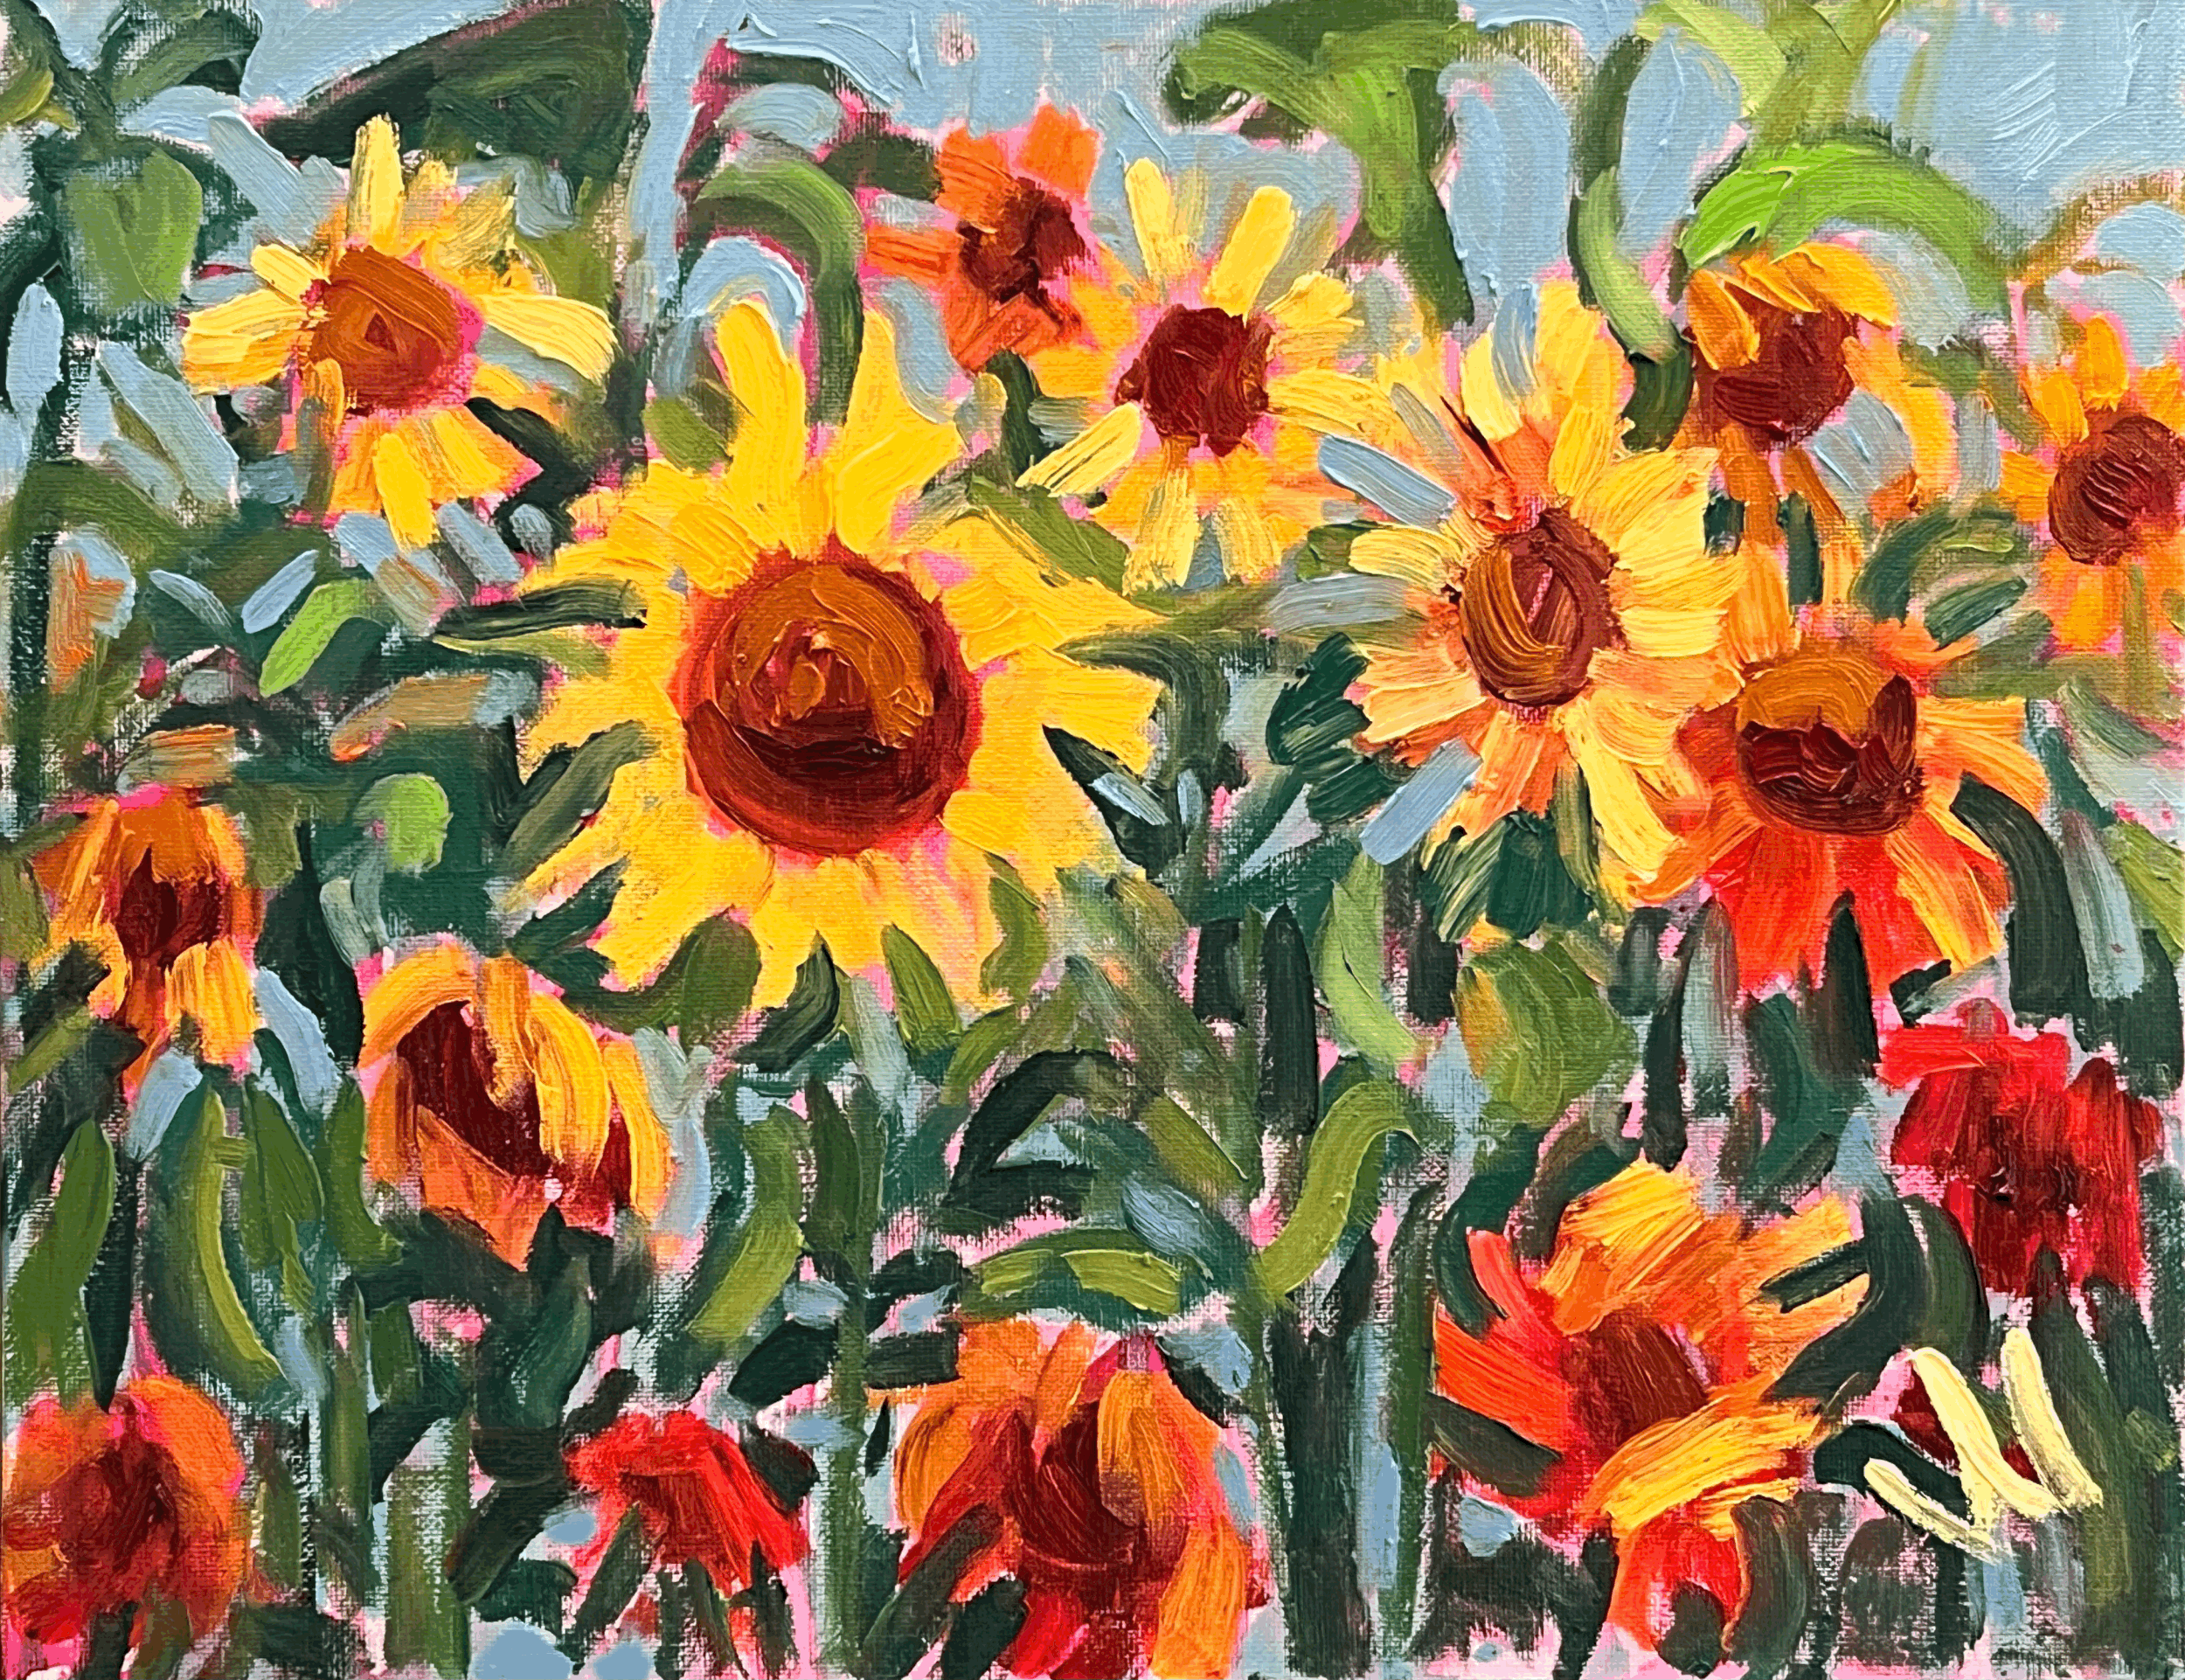 "A Sunflower's Stare" SOLD